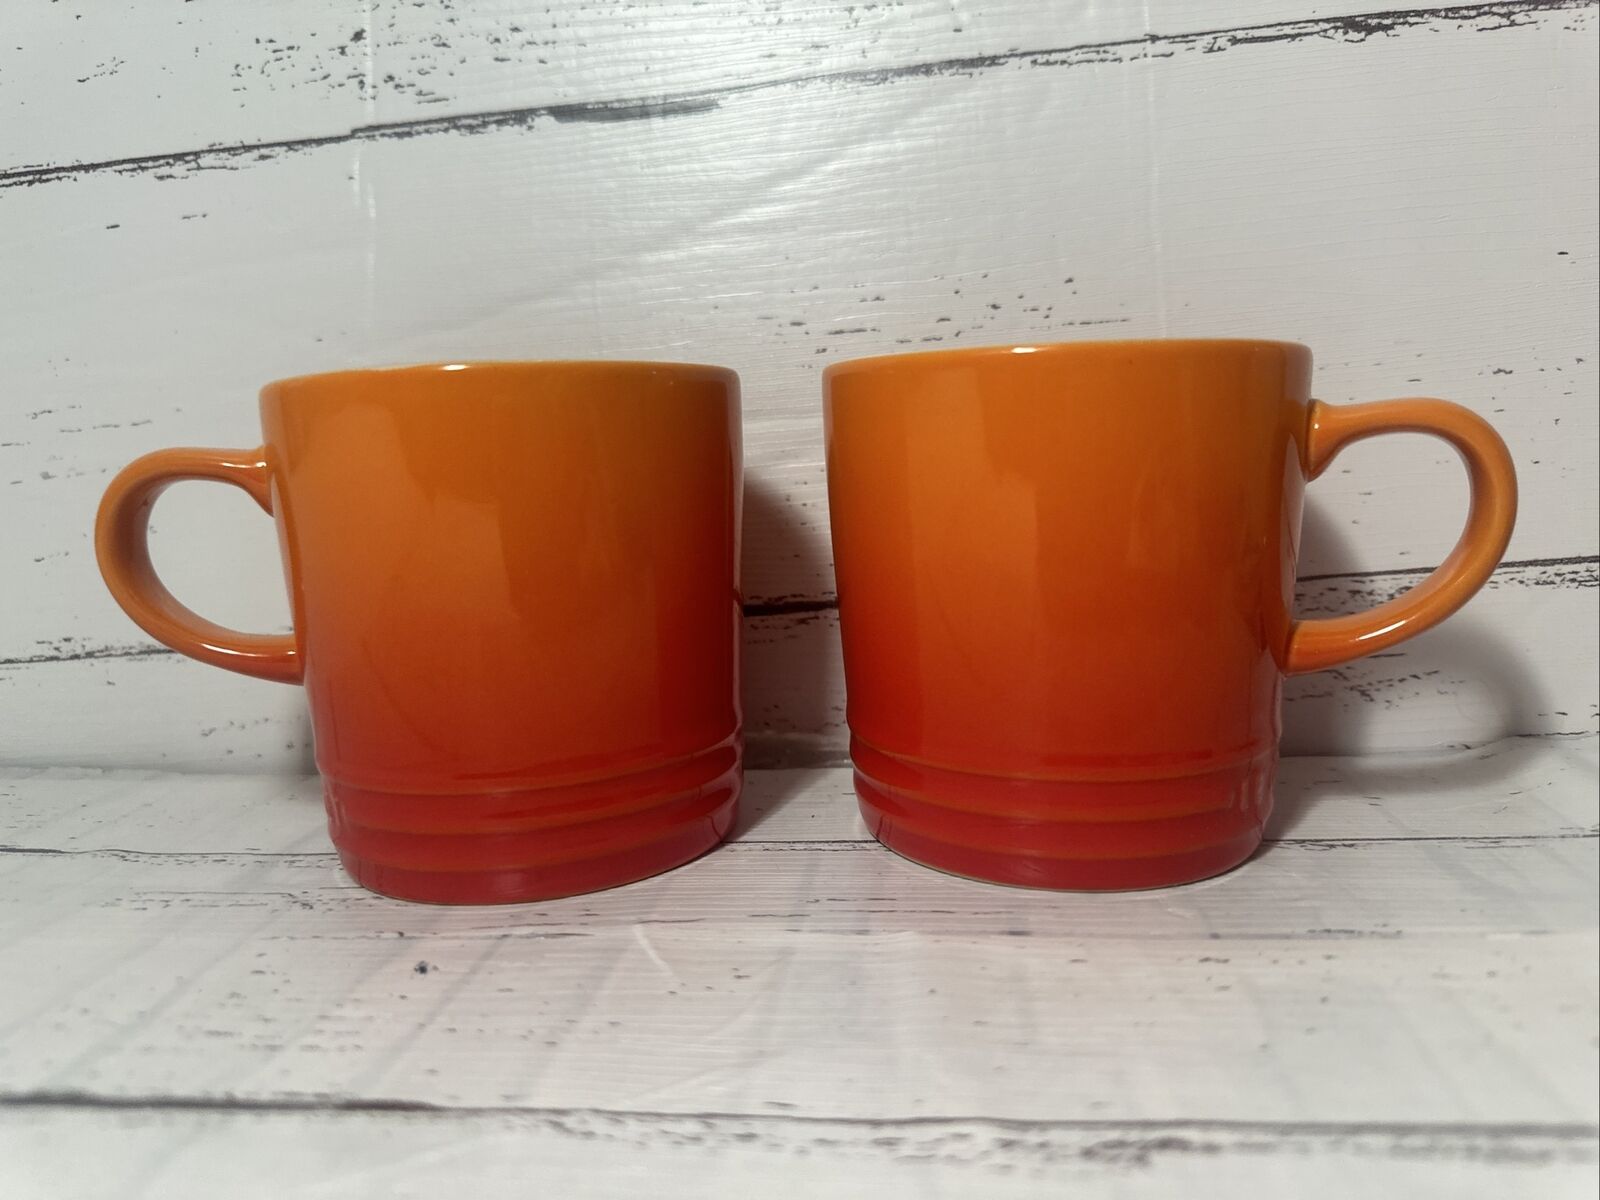 Le Creuset Set of 2 Coffee Mugs in Flame Color 12 oz. Second Choix